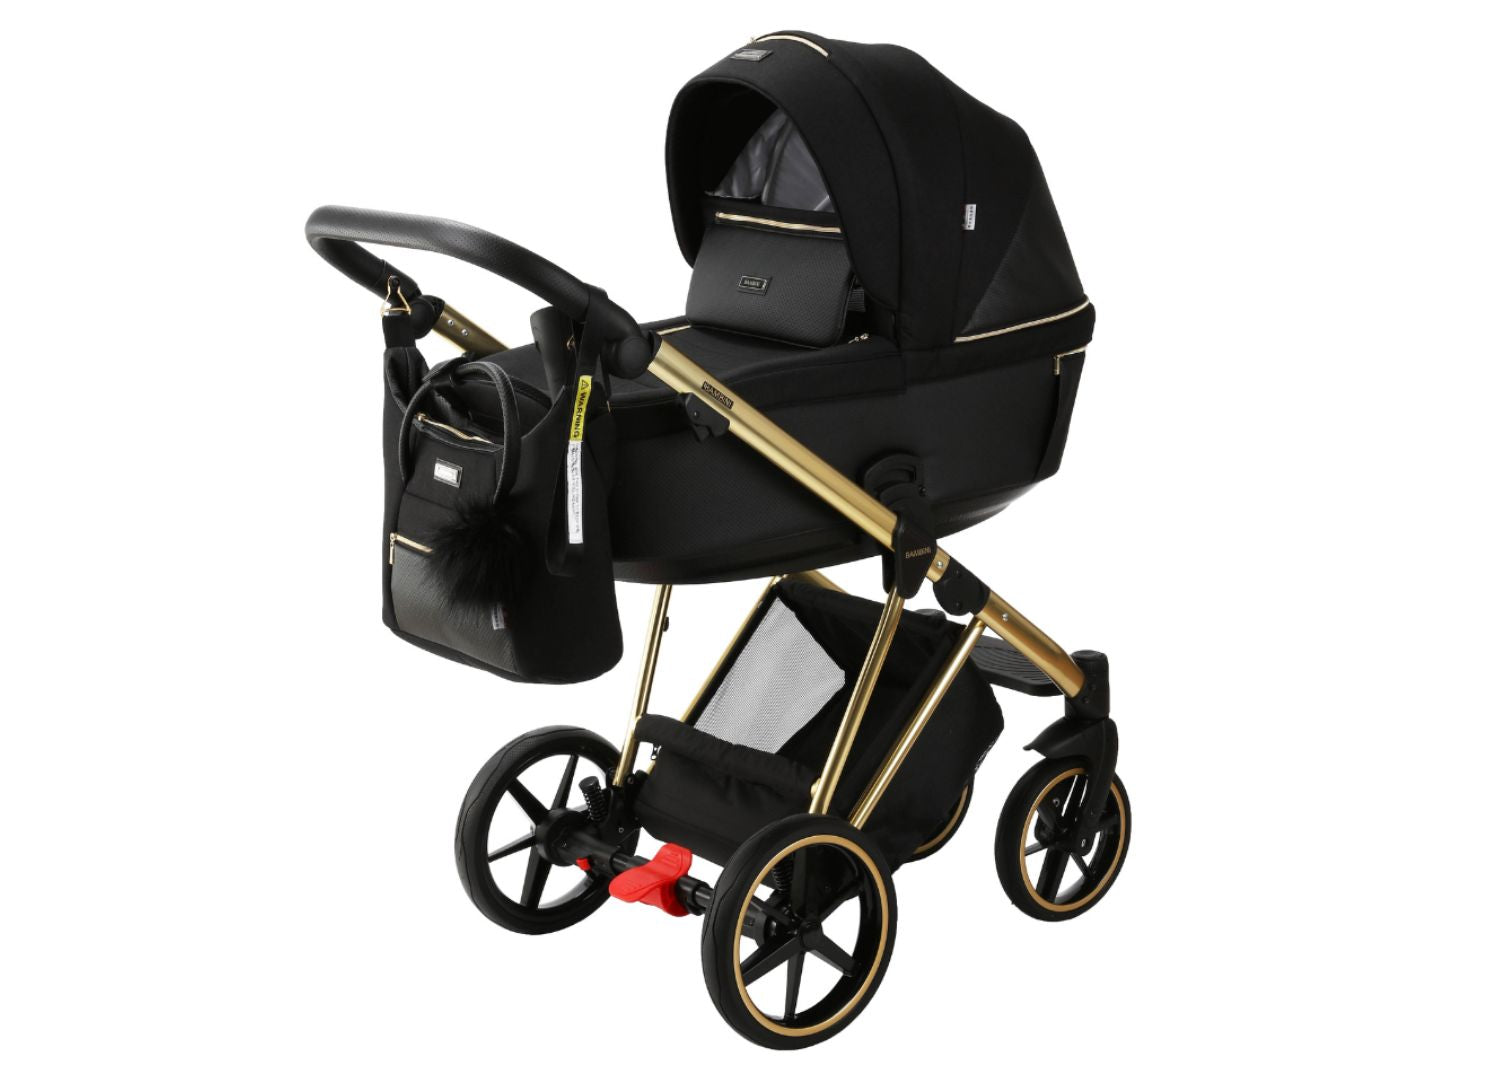 Bambini Prams GENEVA | The best pram for stand-out style and European finishes.